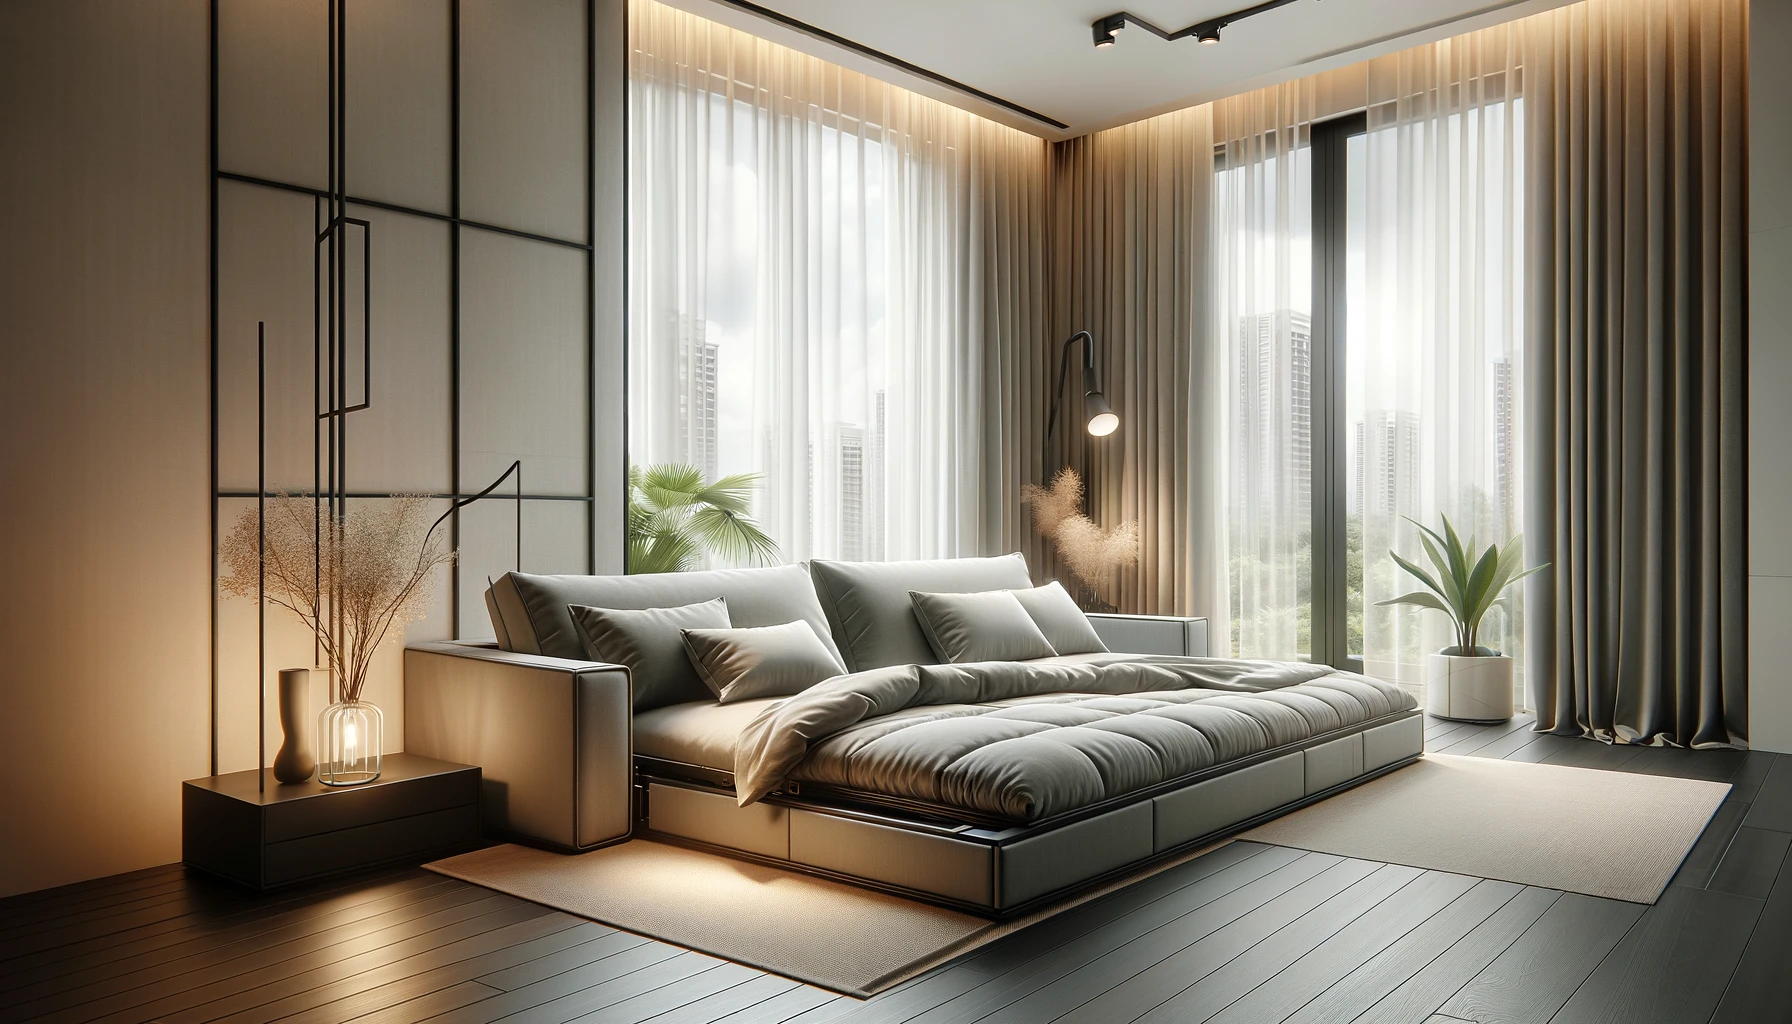 Modern bedroom interior design with city view.